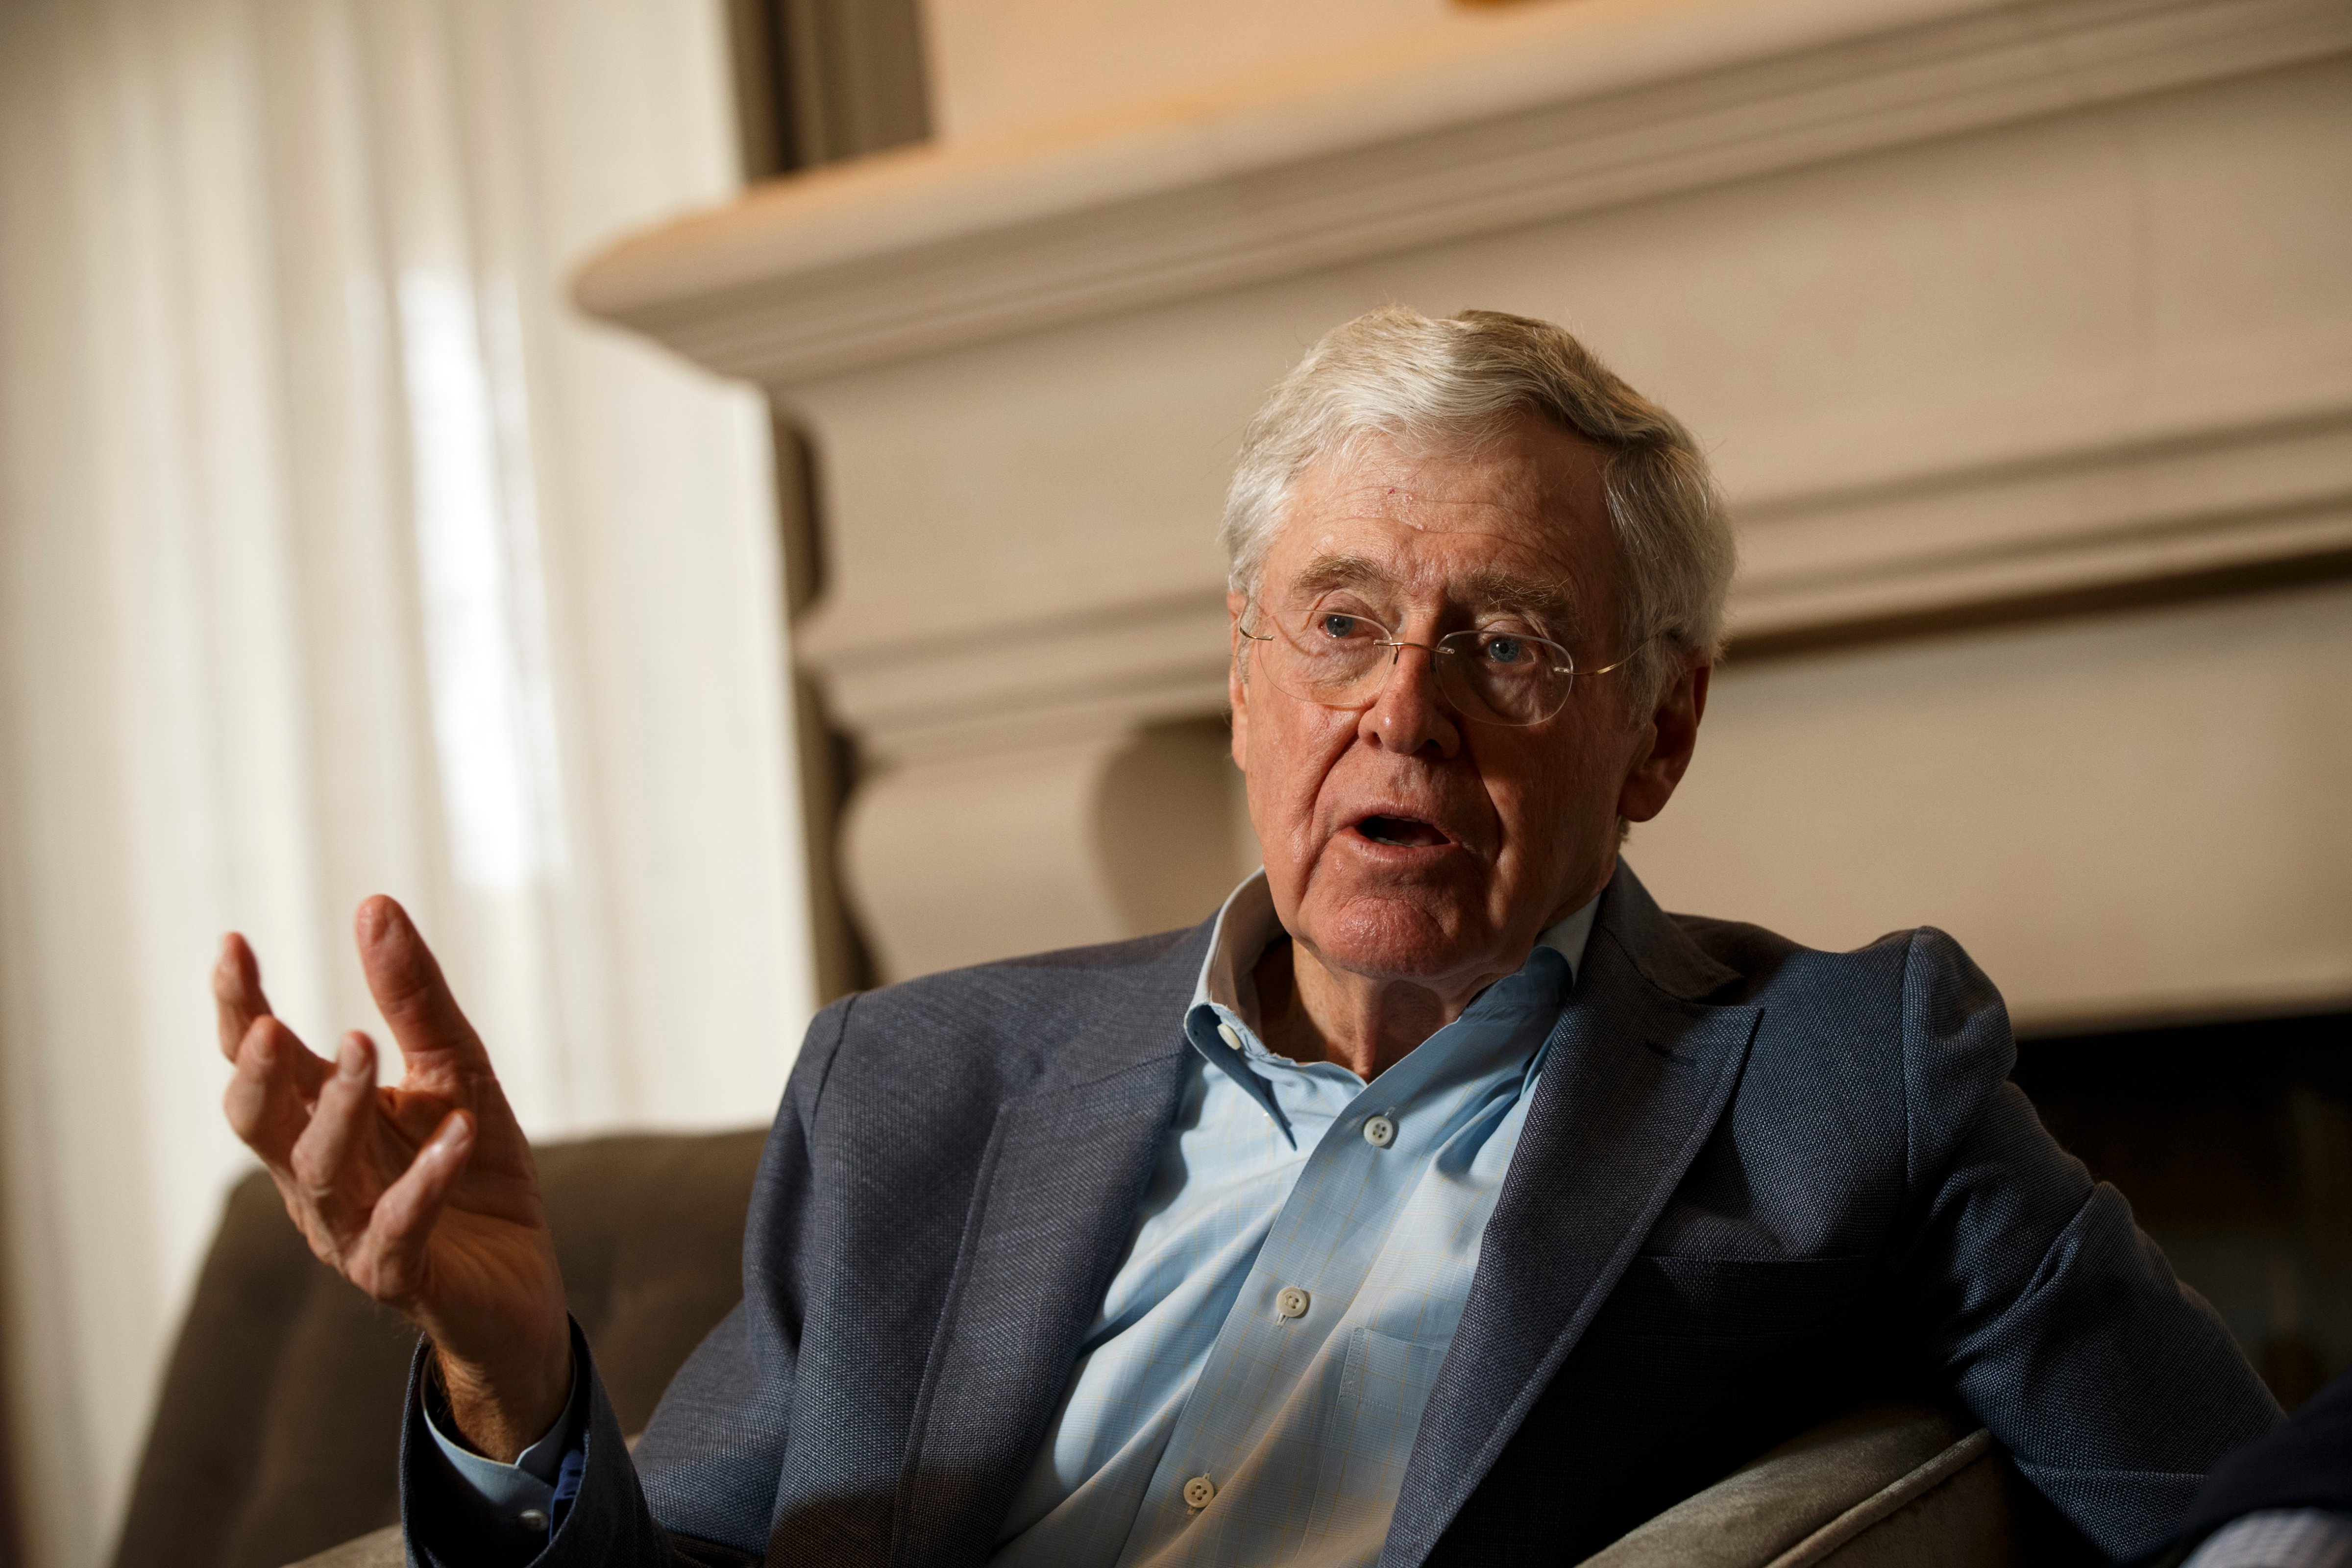 Charles Koch speaks during an interview with the Washington <i>Post</i> at the Freedom Partners Summit on Monday, August 3, 2015, in Dana Point, Calif. (Patrick T. Fallon—The Washington Post/Getty Images)